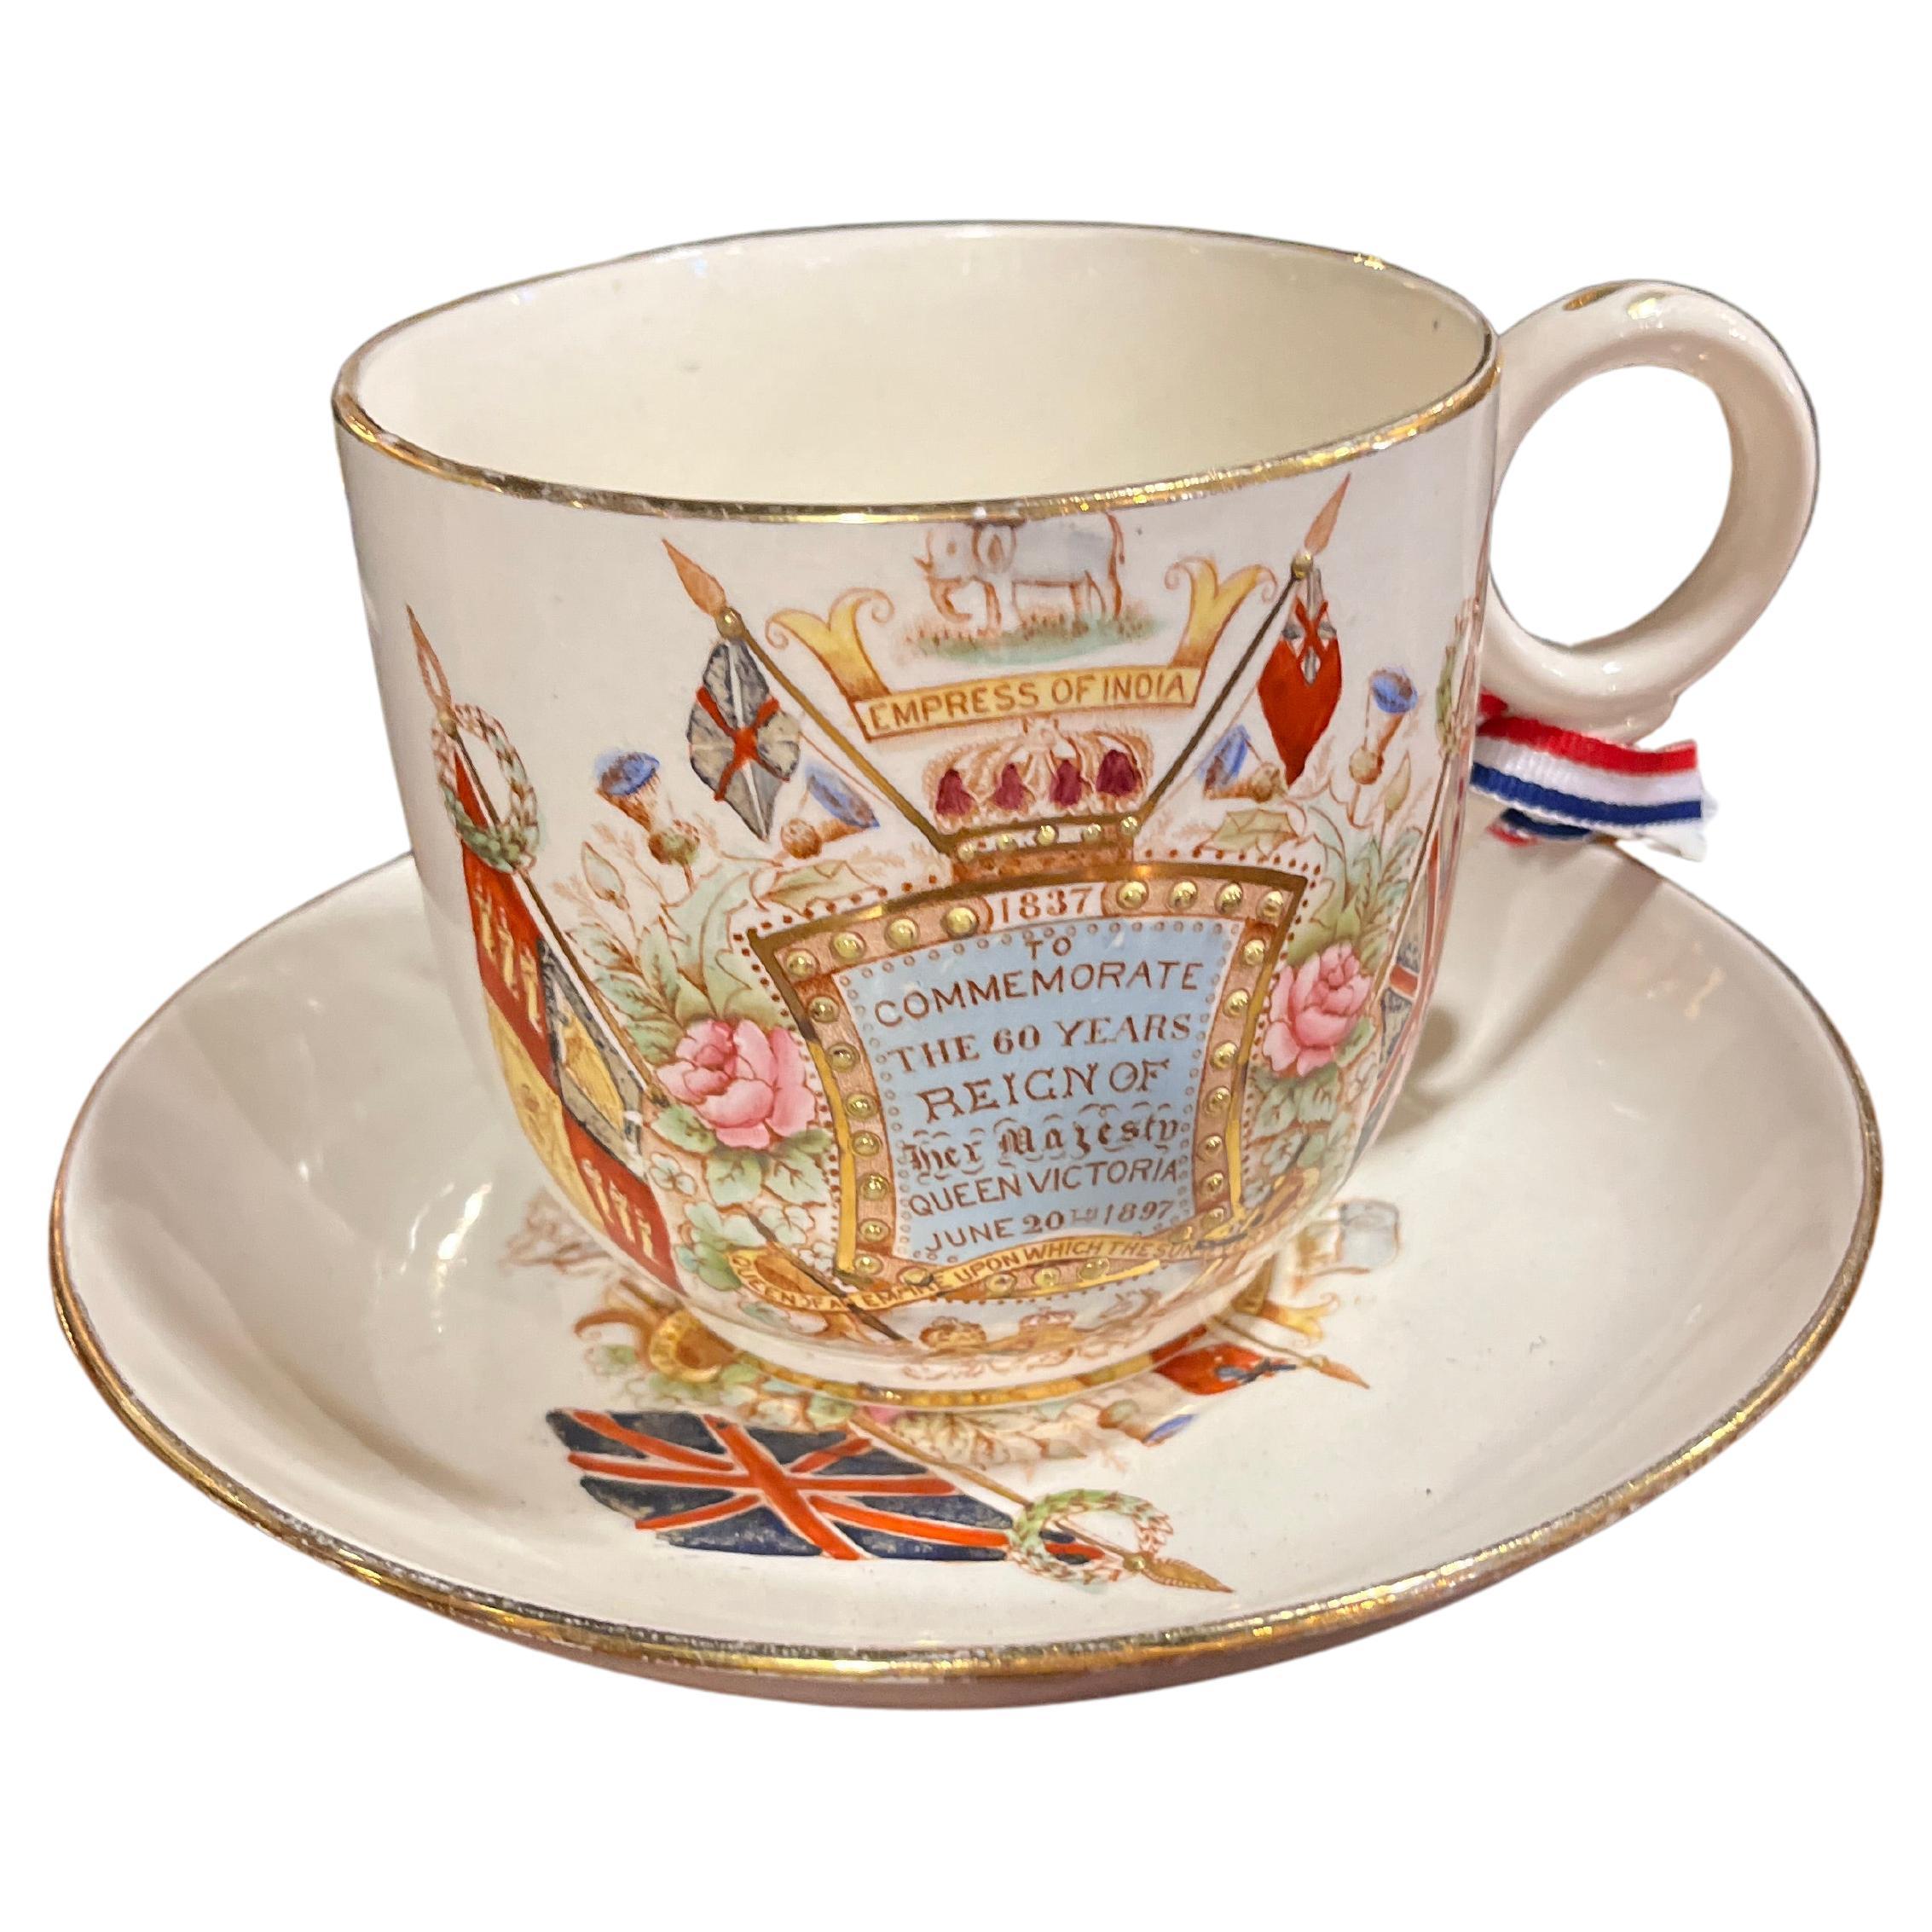 Circa 1897 Queen Victoria's Commemorative Large Cup & Saucer  For Sale